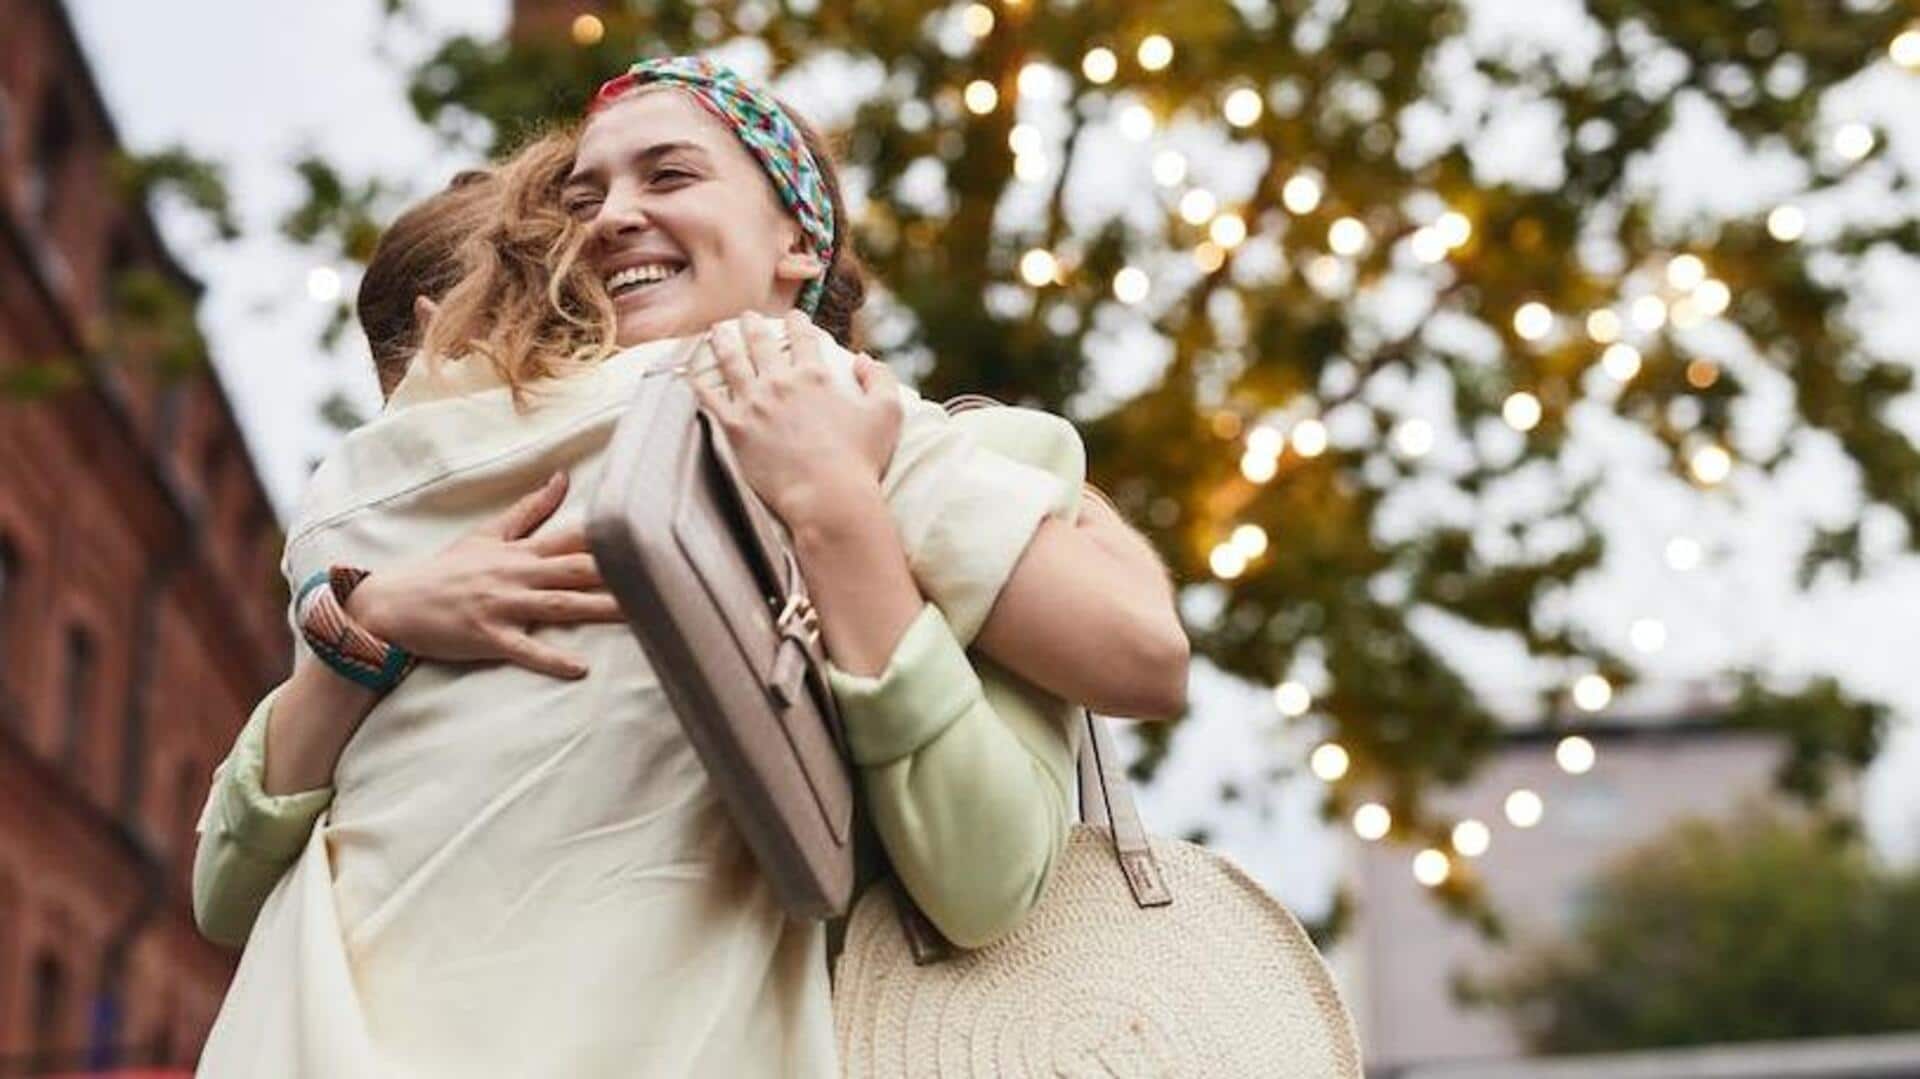 Embracing emotions: Know the different types of hugs